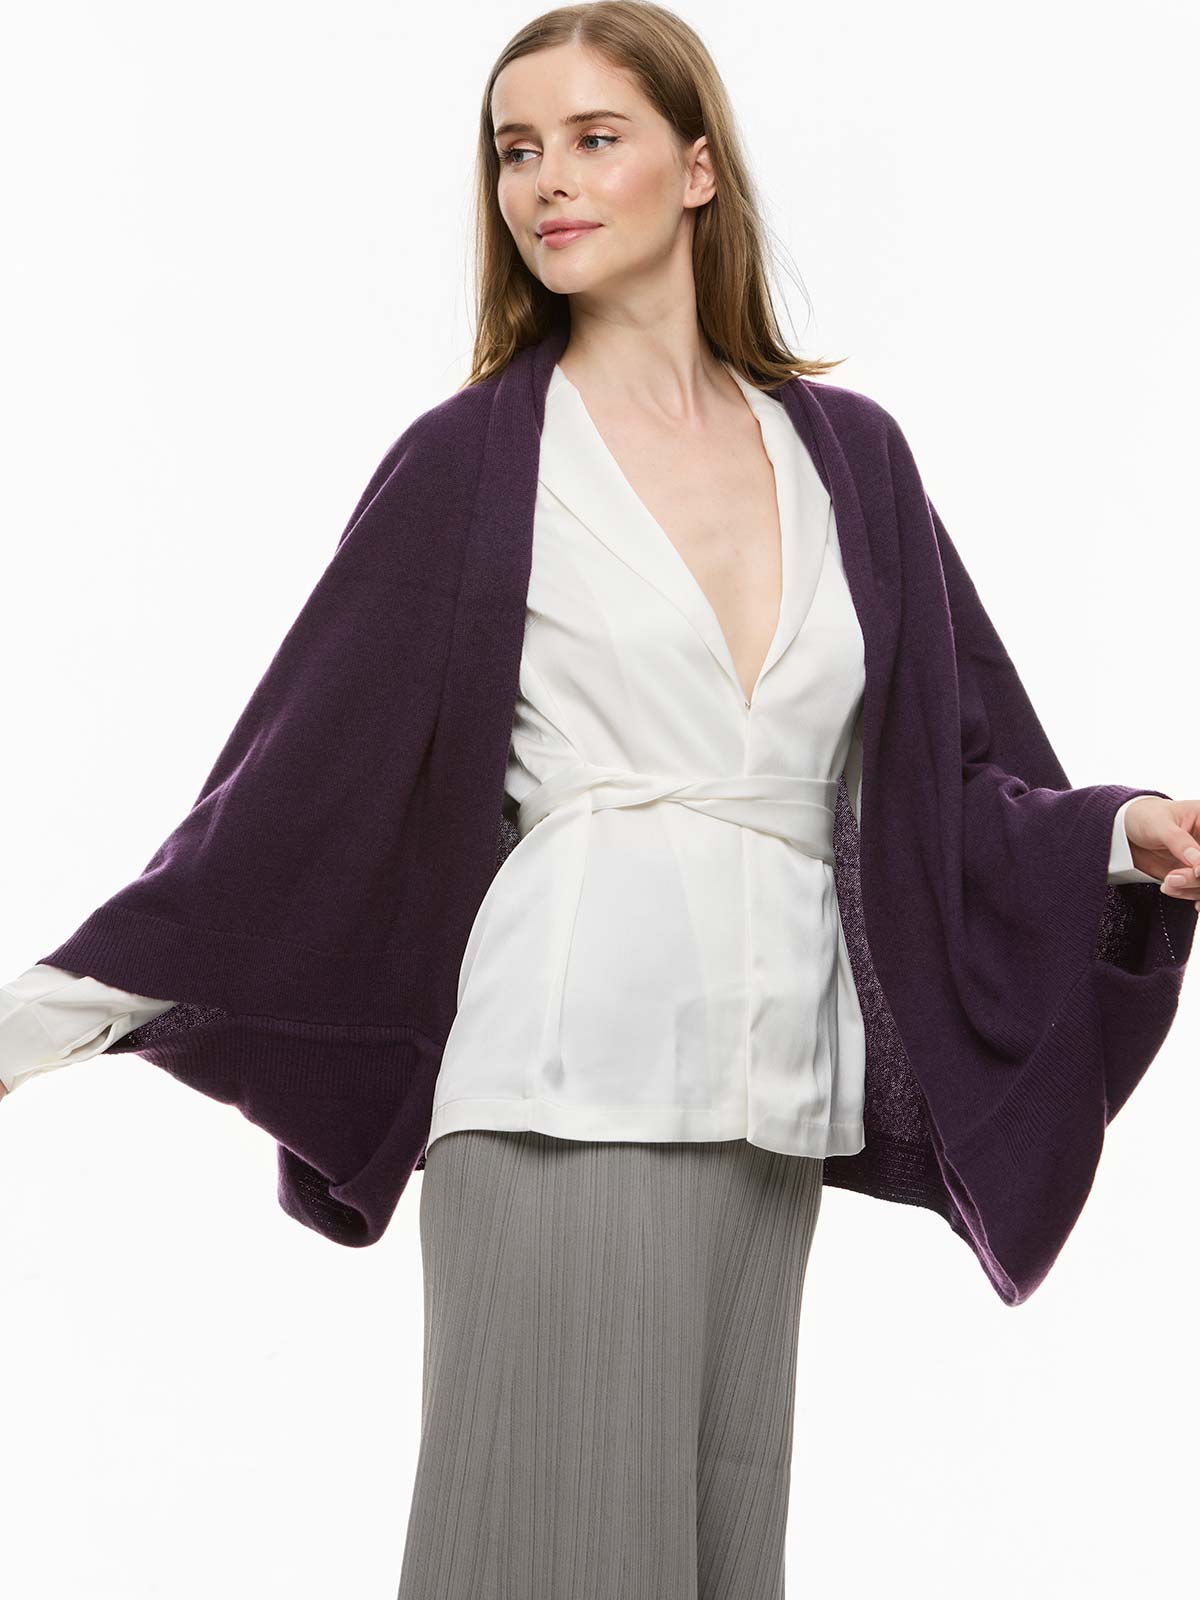 wearable cashmere wrap